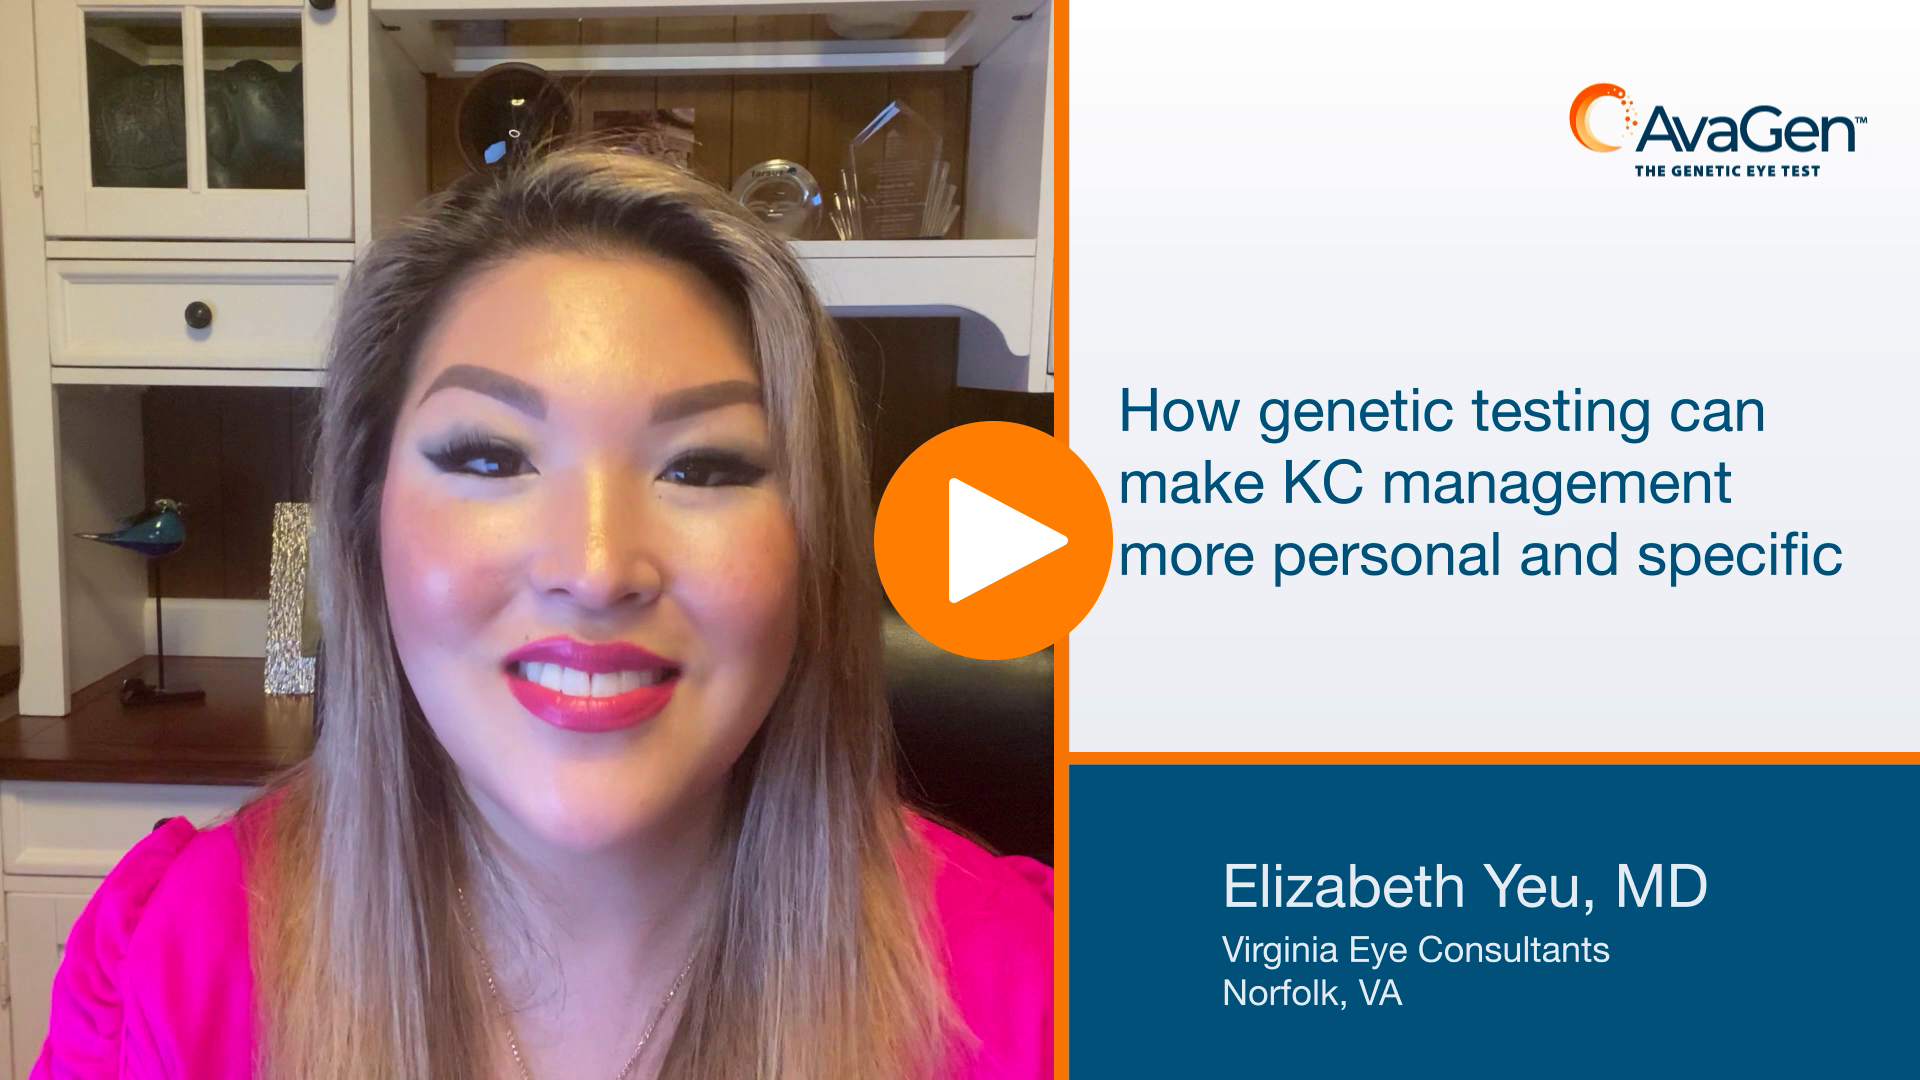 How genetic testing can make KC management more personal and specific